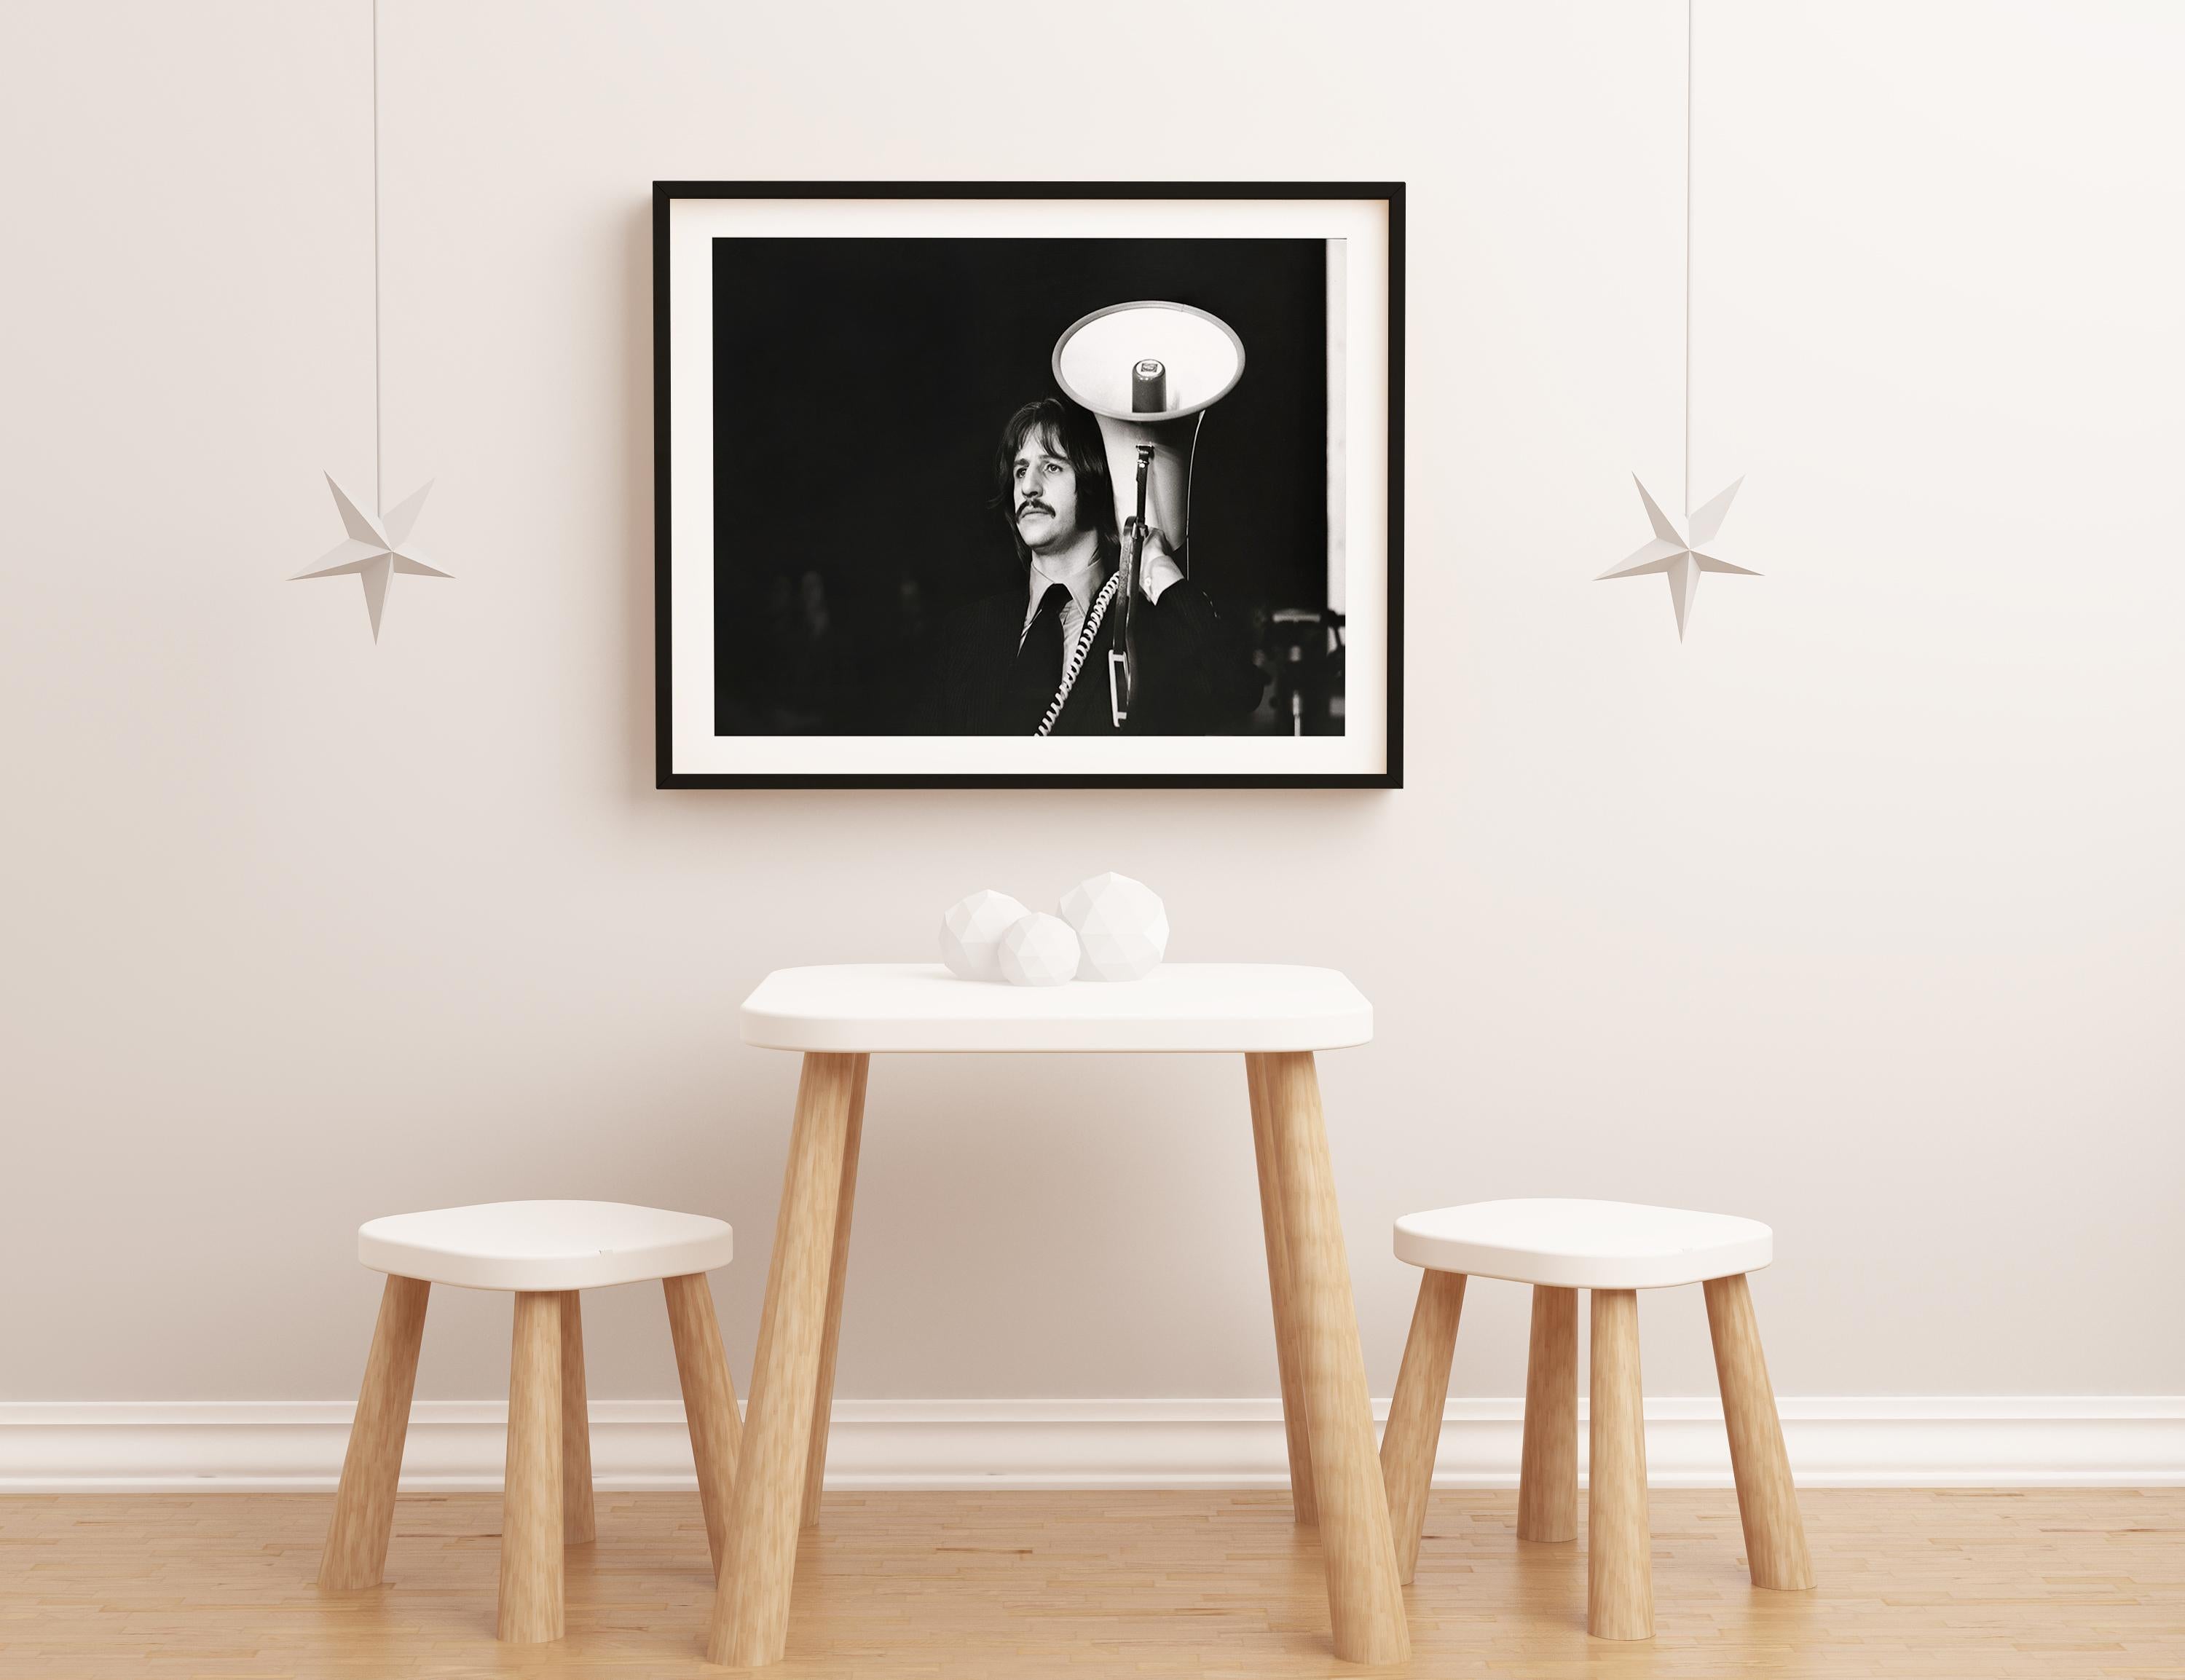 This black and white portrait features Ringo Starr of the Beatles holding a megaphone.

Ringo Starr is an English musician, singer, songwriter, and actor who gained worldwide fame as the drummer for the Beatles. He occasionally sang lead vocals,